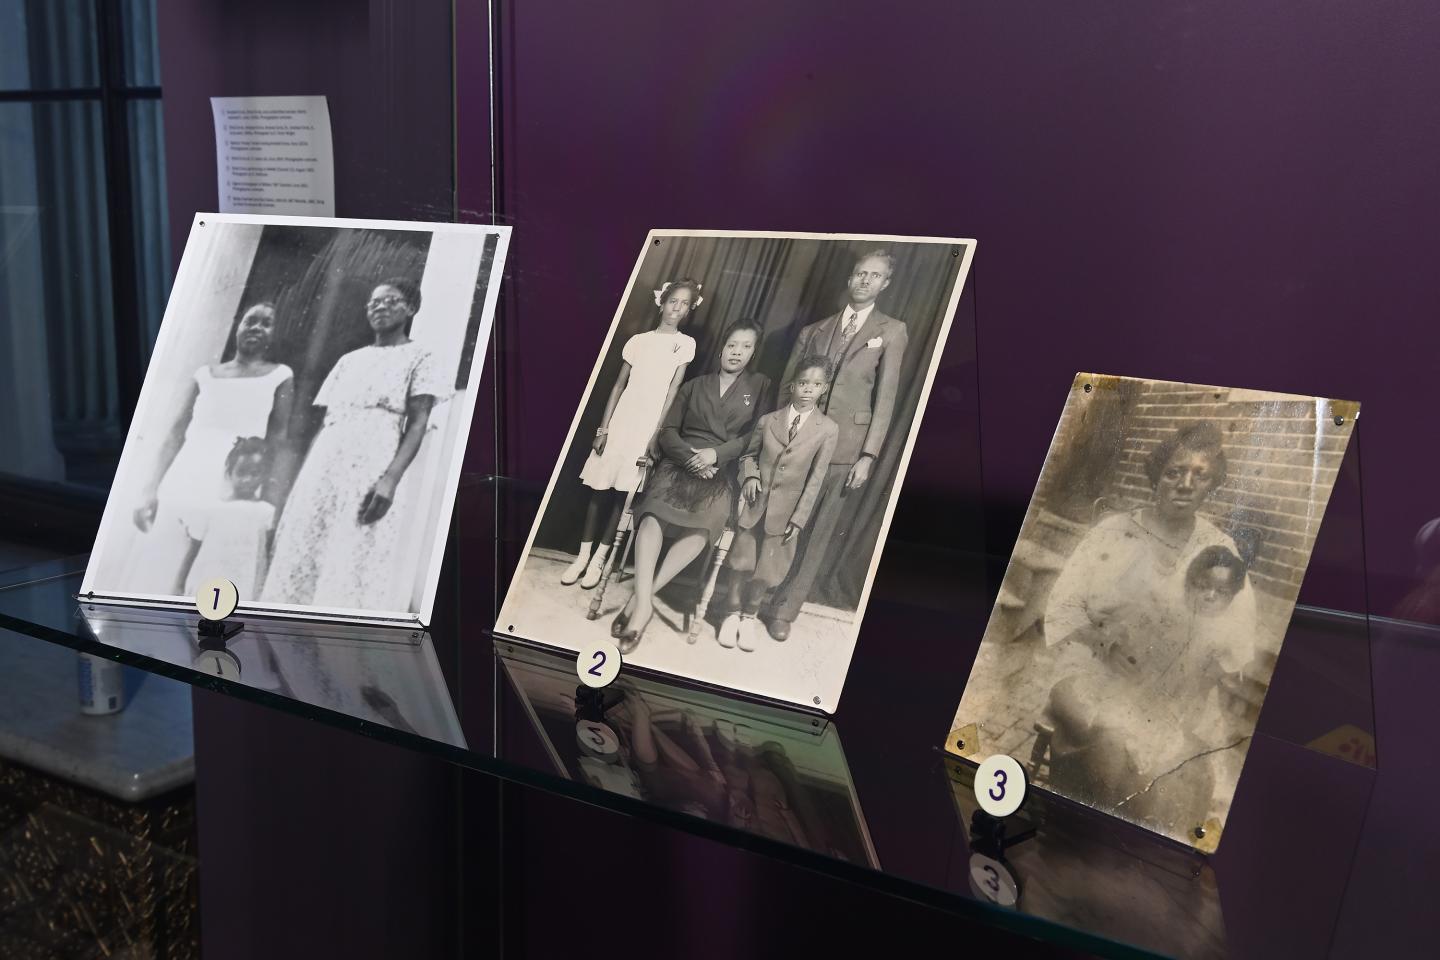 Black and white photographs on display in the Ethel's Place exhibition